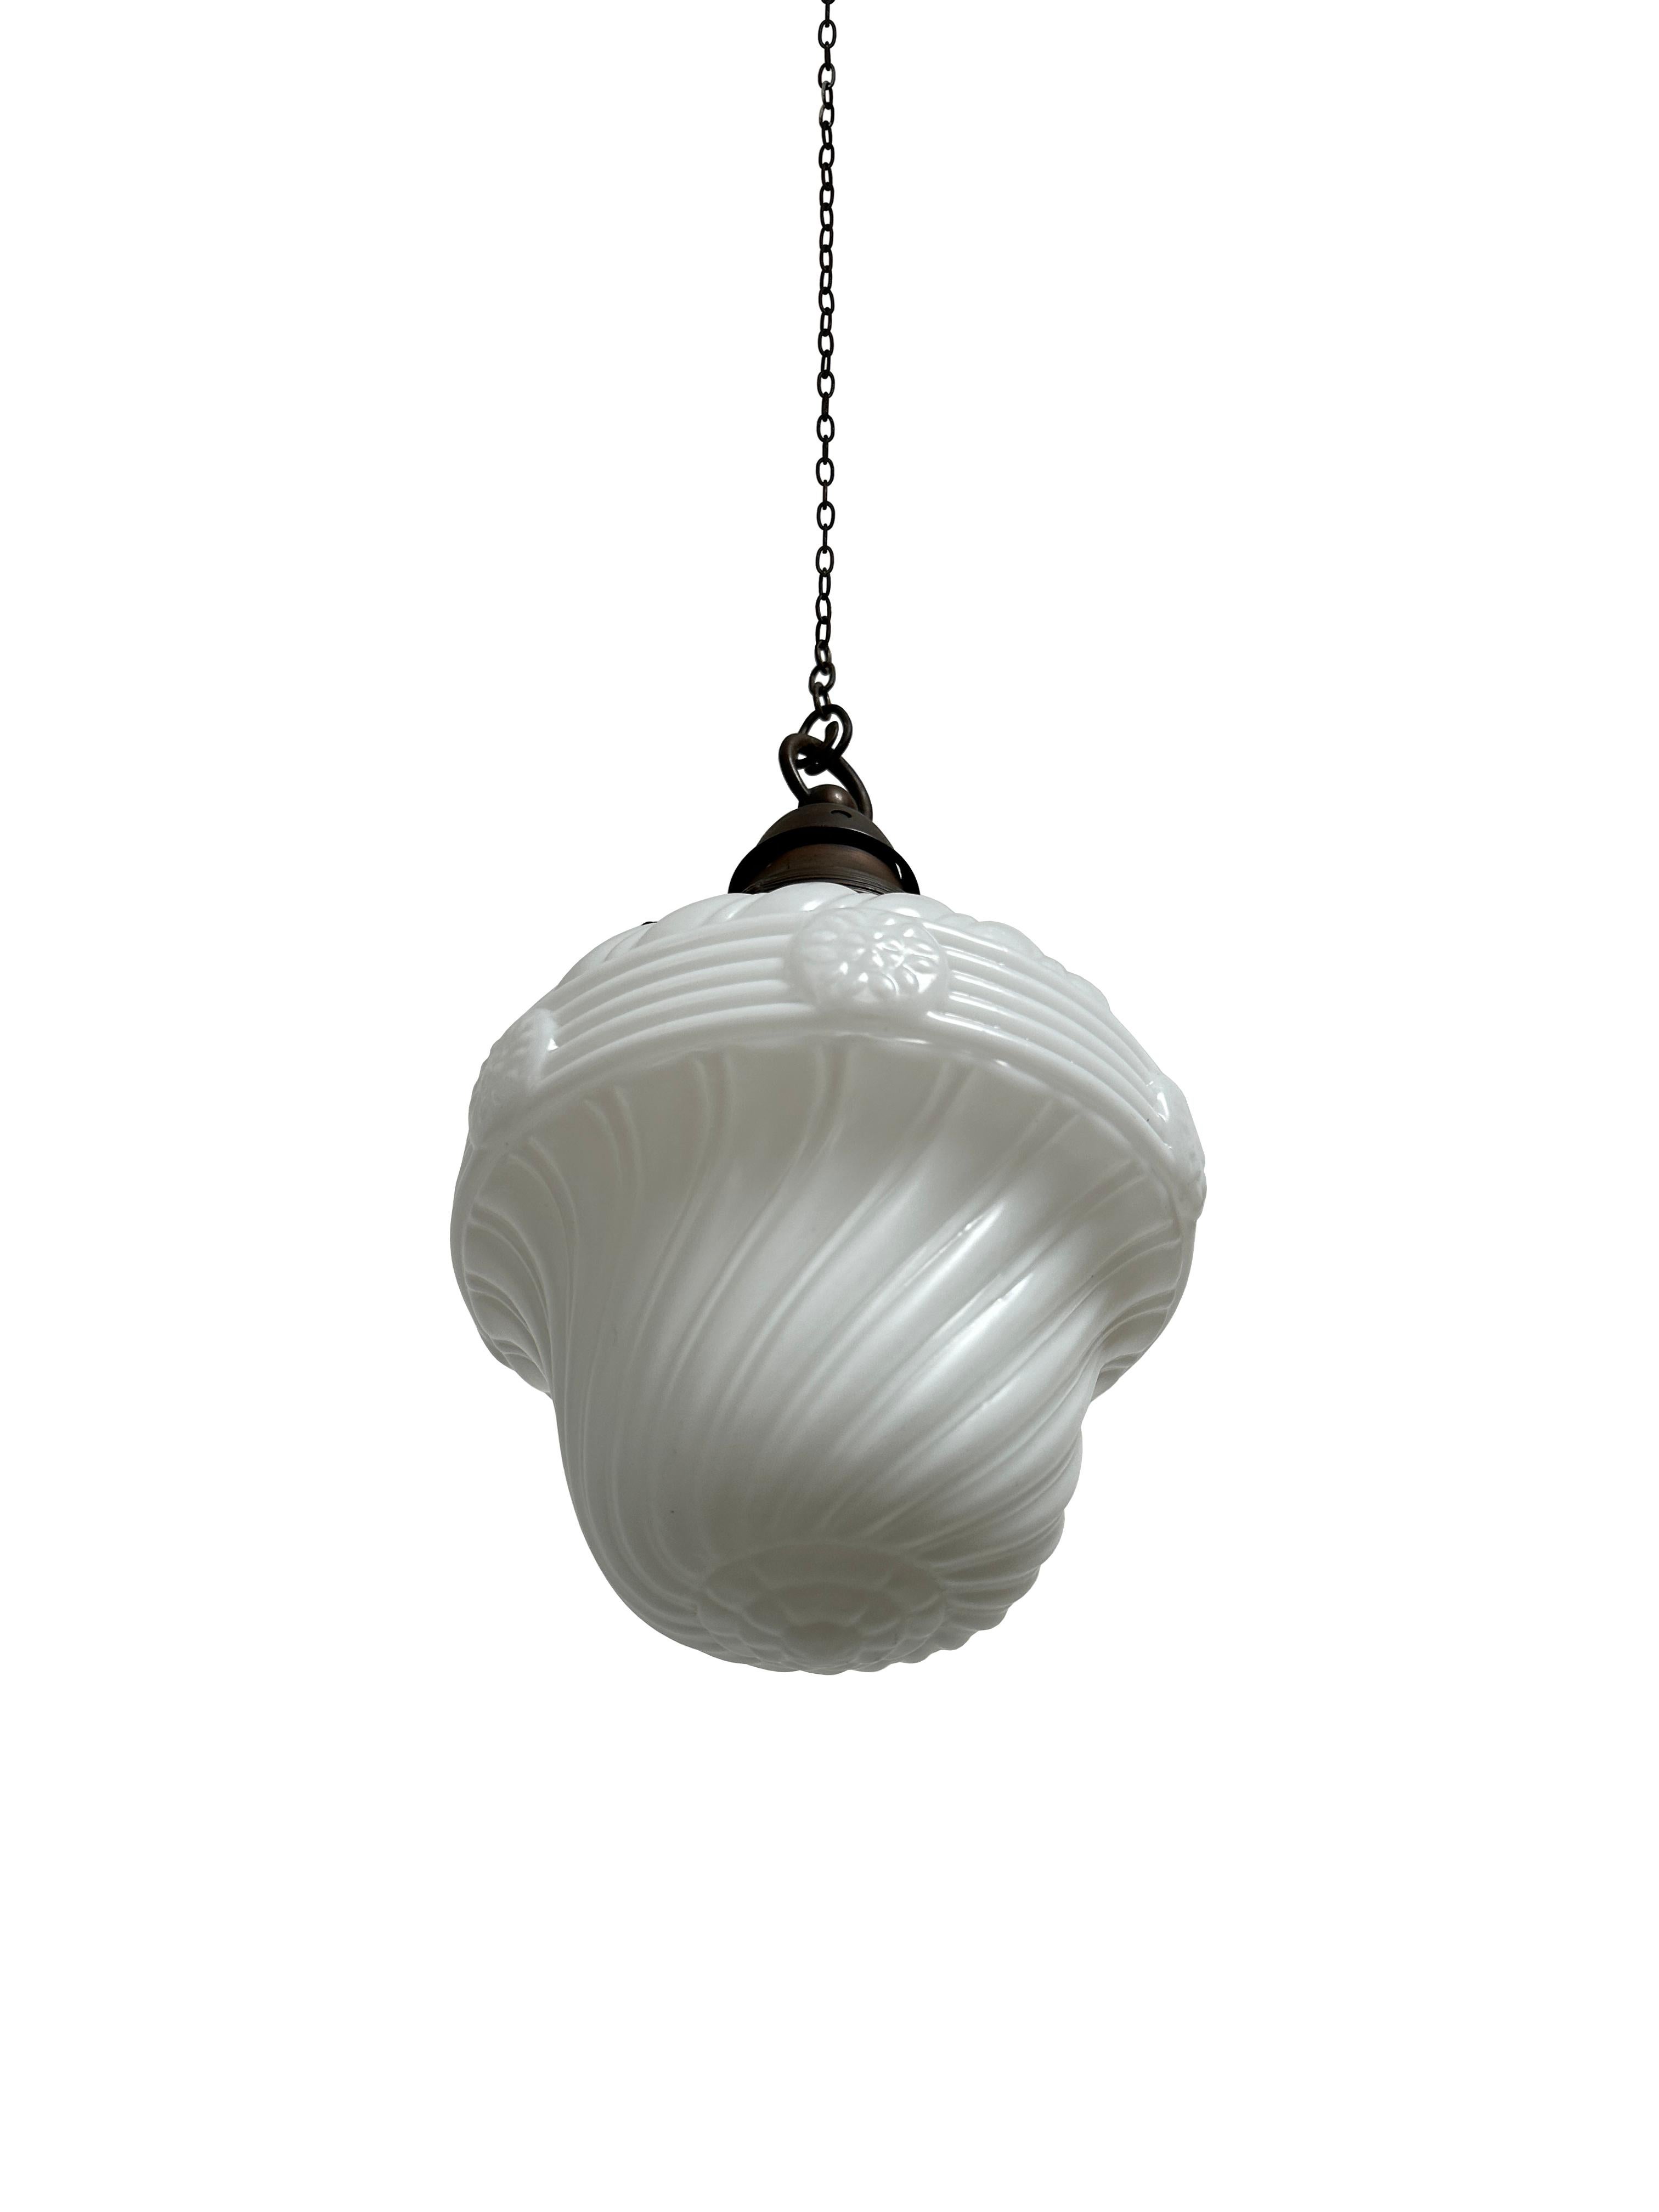 - A wonderful satin glass church opaline ceiling pendant, circa 1910.
- Incredible detail across the opaline and all original patinated copper gallery. 
- Rewired in braided flex and PAT tested, ready to hang. 
- 36cm High, 22cm Wide, 22cm Deep.